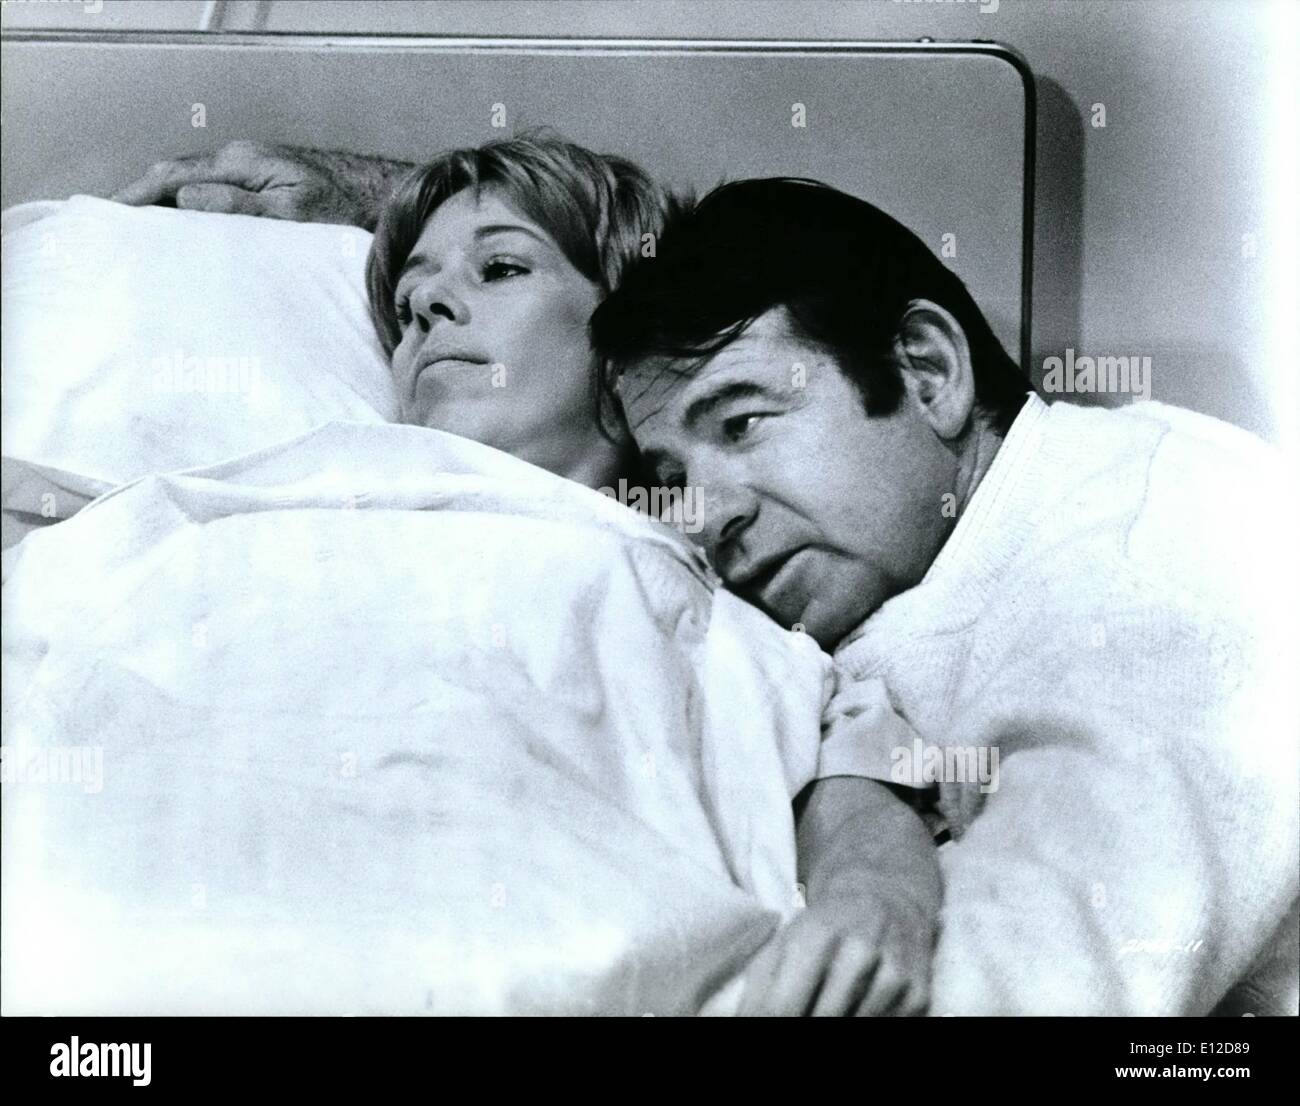 Dec. 15, 2011 - Pete 'N' Tillie Following a trying childbirth period, Tillie Schlaine (Carol Burnet) is comforted by her husband, Peter Seltzer (Walter Matthau). A scene from Universal's ''Pete 'n' Tillie' starring Walter Matthau and Carol Burnett, and co starring Geraldine Page, Barry Nelson and Rene Auberjonois. The comedy drama was directed by Martin Ritt in Technicolor from producer Julius J. Epstein's screenplay based on the novella, ''Witch's Milk'', by Peter De Vries. Stock Photo